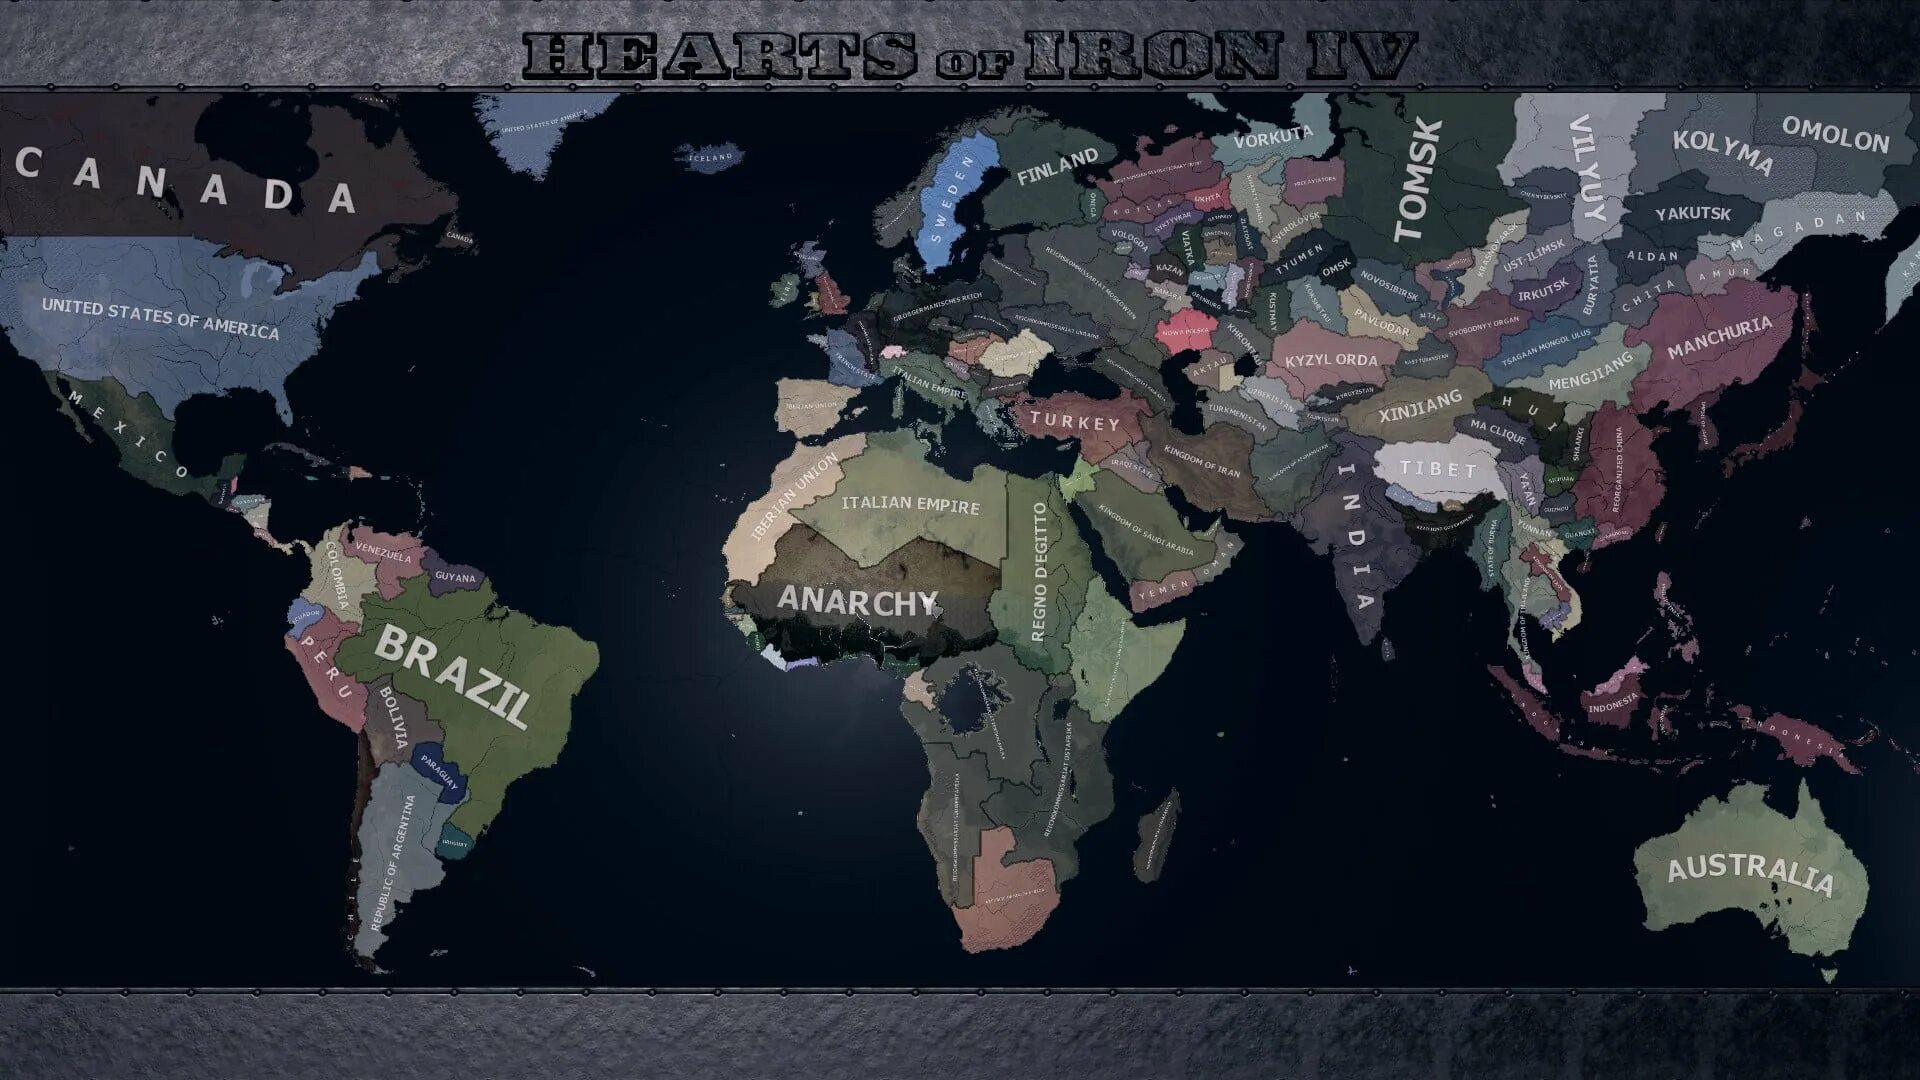 The New order hoi 4 карта. Hoi4 TNO карта Европы. Hearts of Iron 4 last Days of Europe.